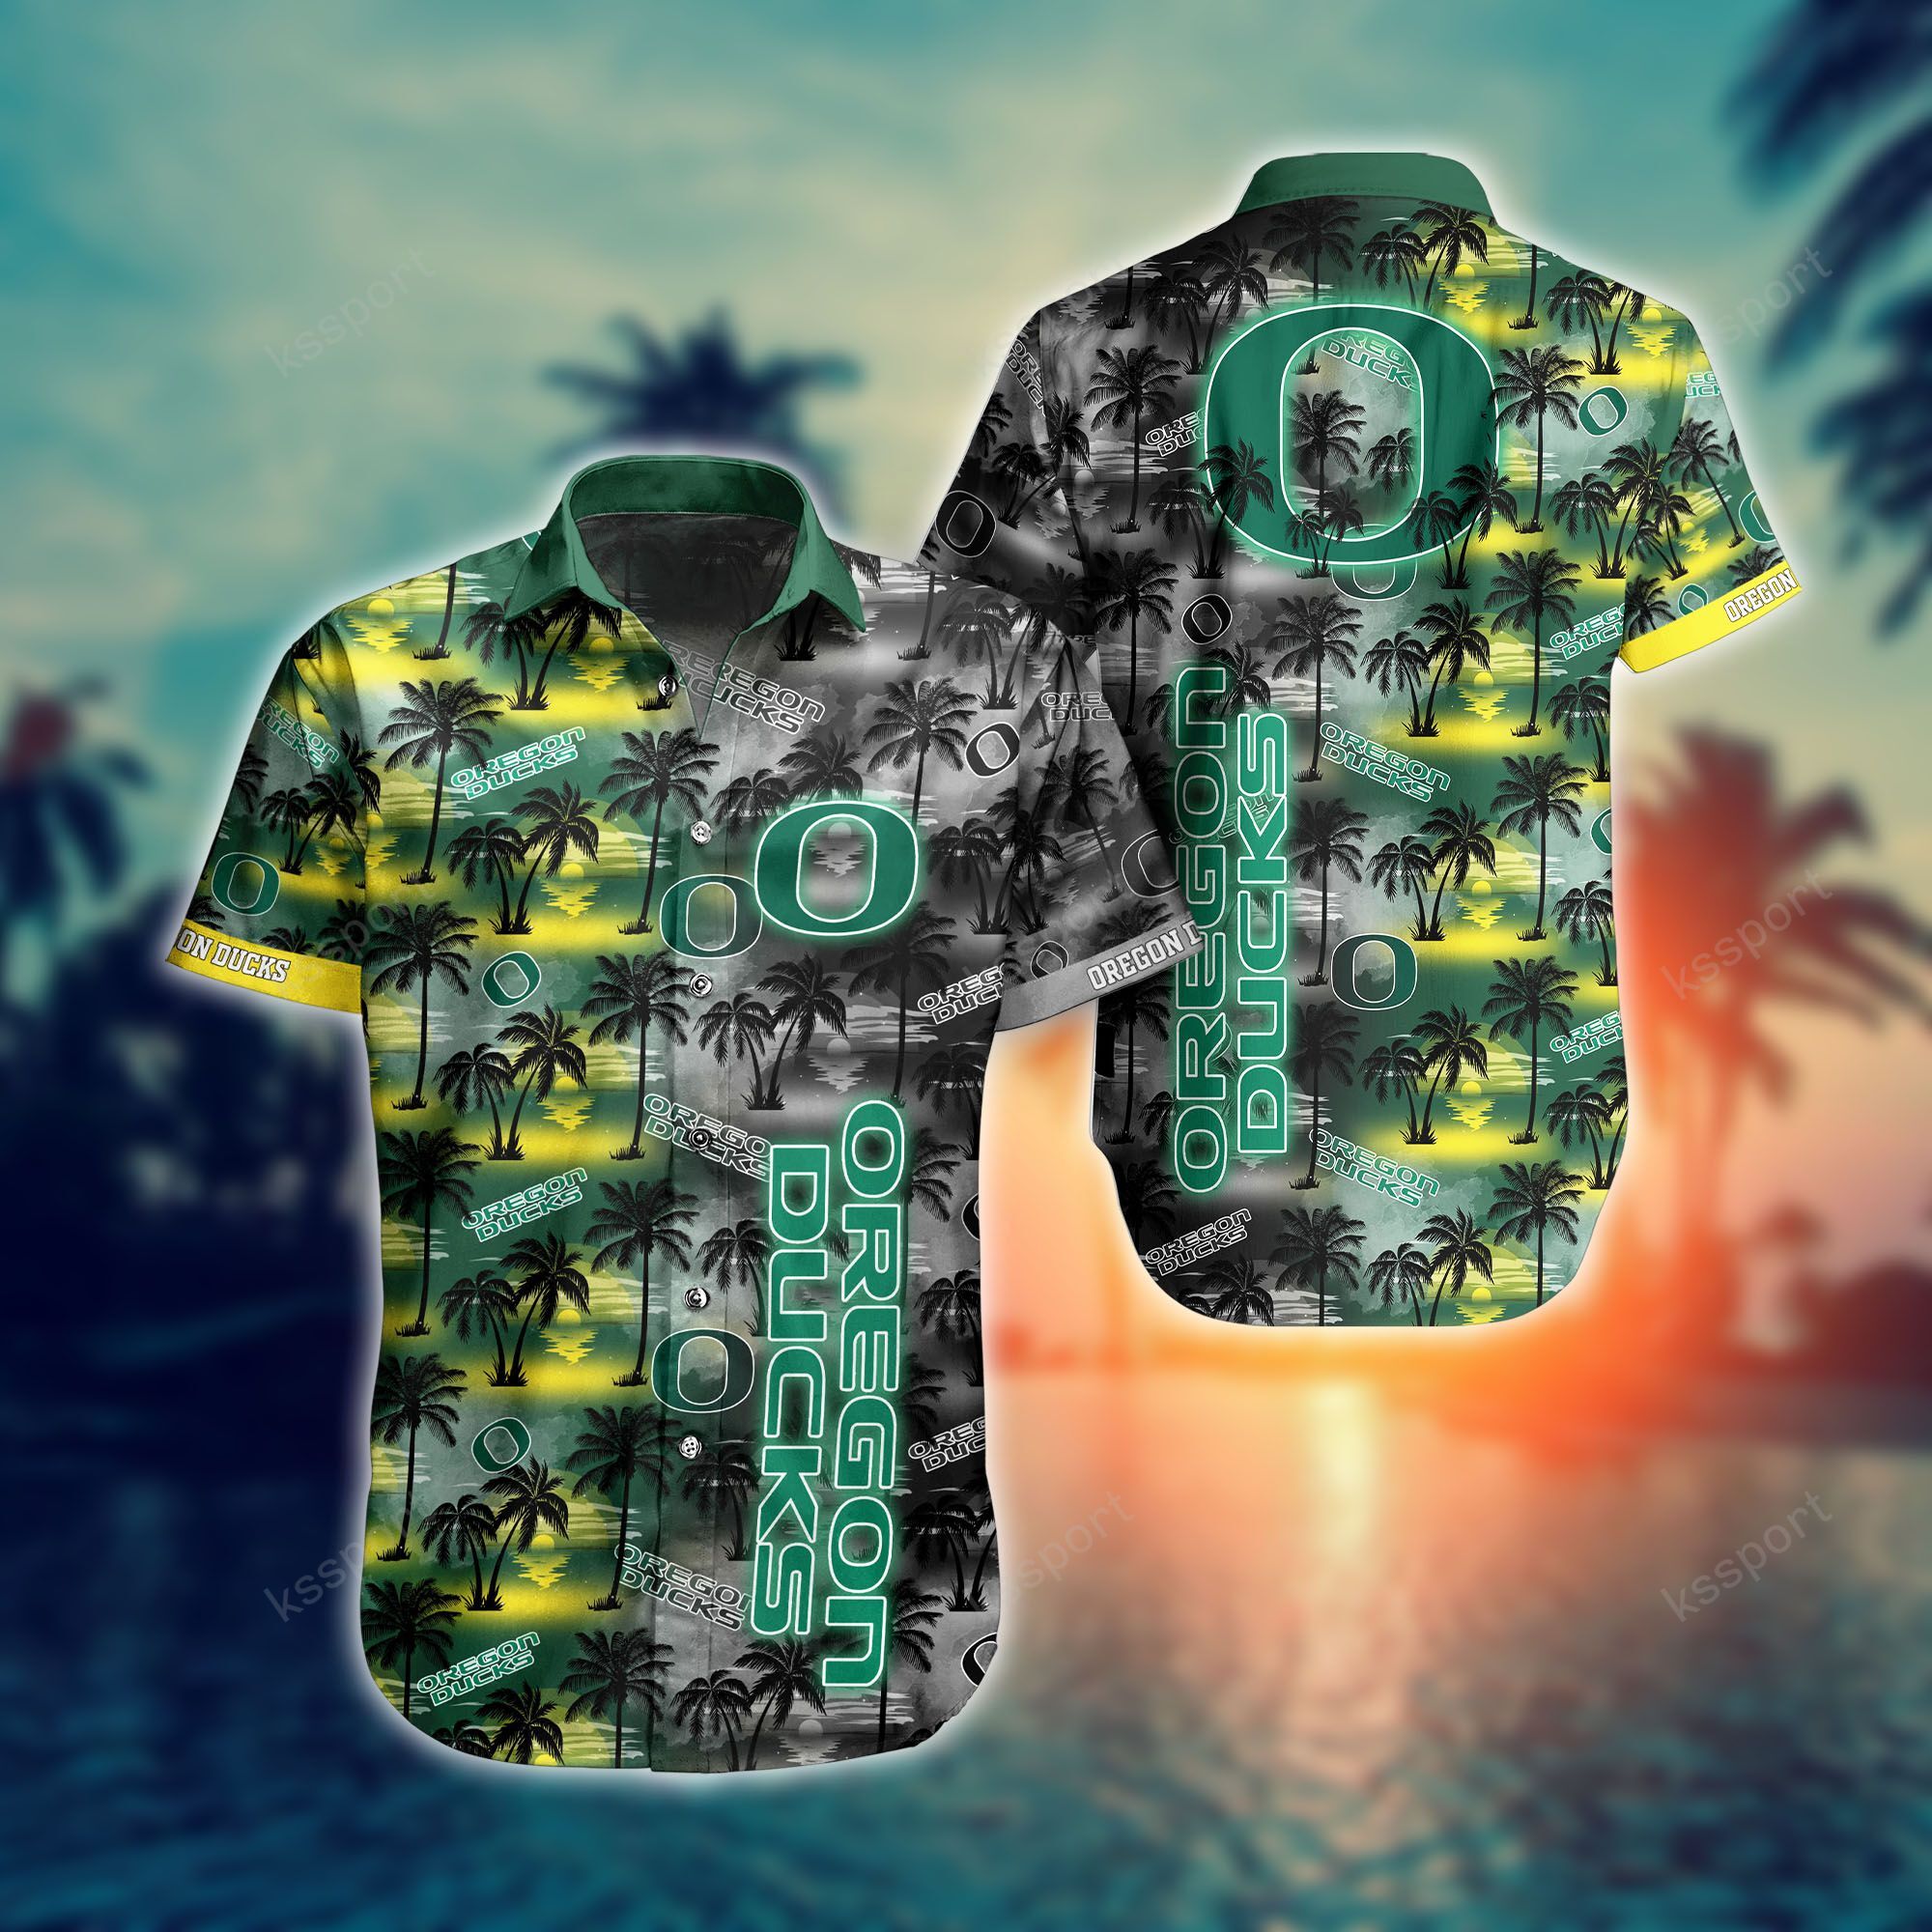 Treat yourself to a cool Hawaiian set today! 51